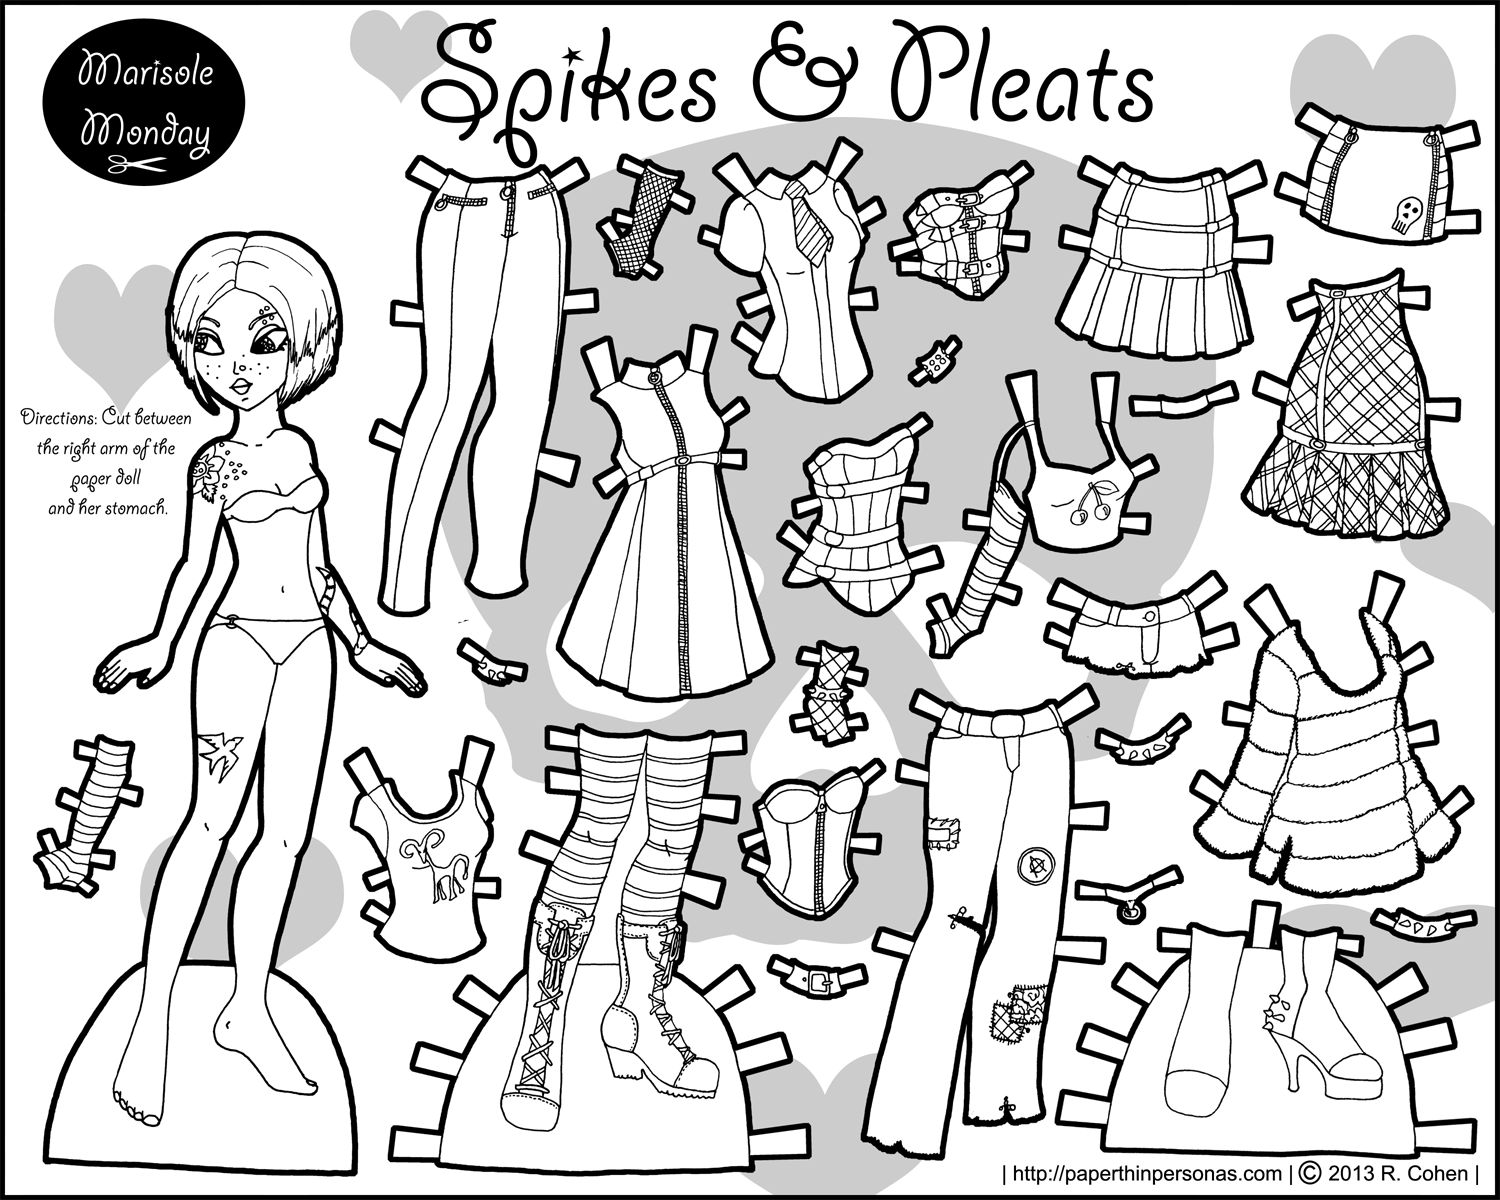 Spikes & Pleats: Punk Fashion Paper Doll | Paper Thin Personas